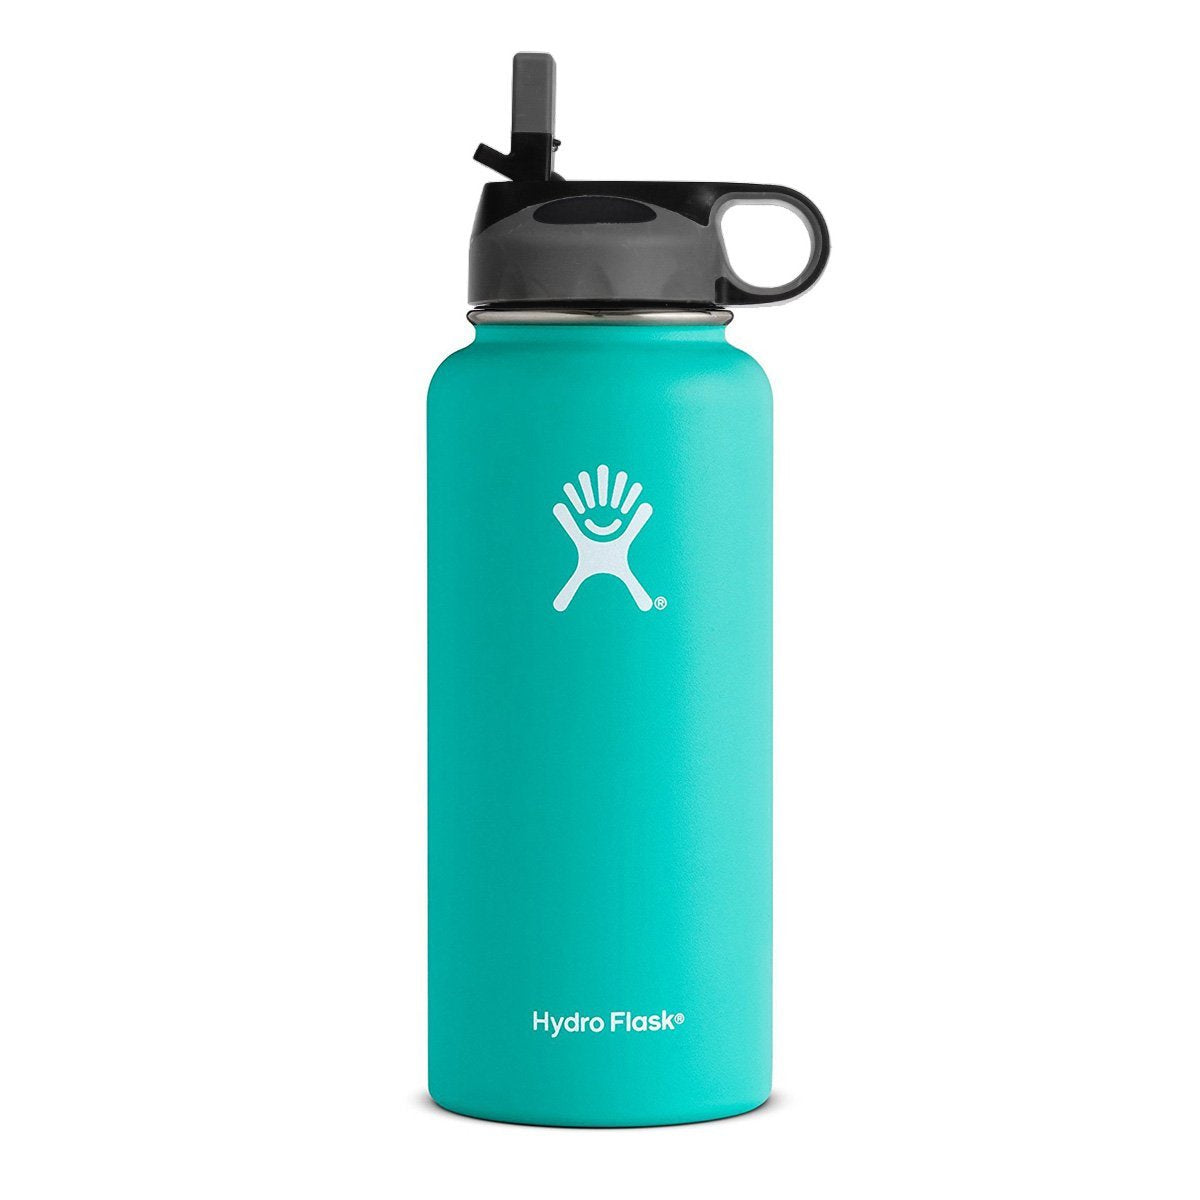 TOPOKO Straw Lid for Hydro Flask Wide Mouth Bottle, Compatible with Hydro Flask & All Other Wide Mouth Stainless Steel Bottles